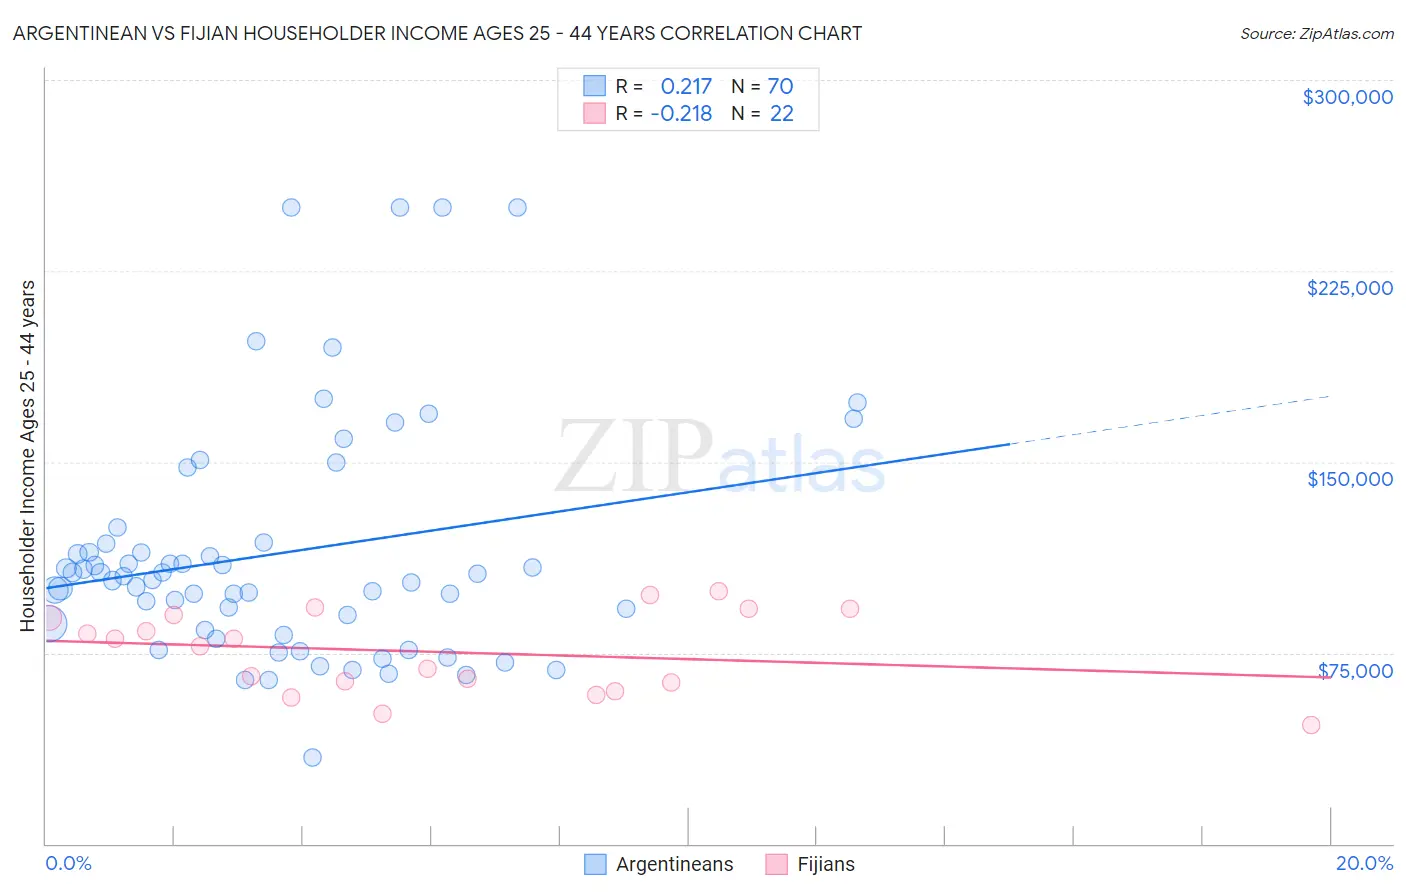 Argentinean vs Fijian Householder Income Ages 25 - 44 years